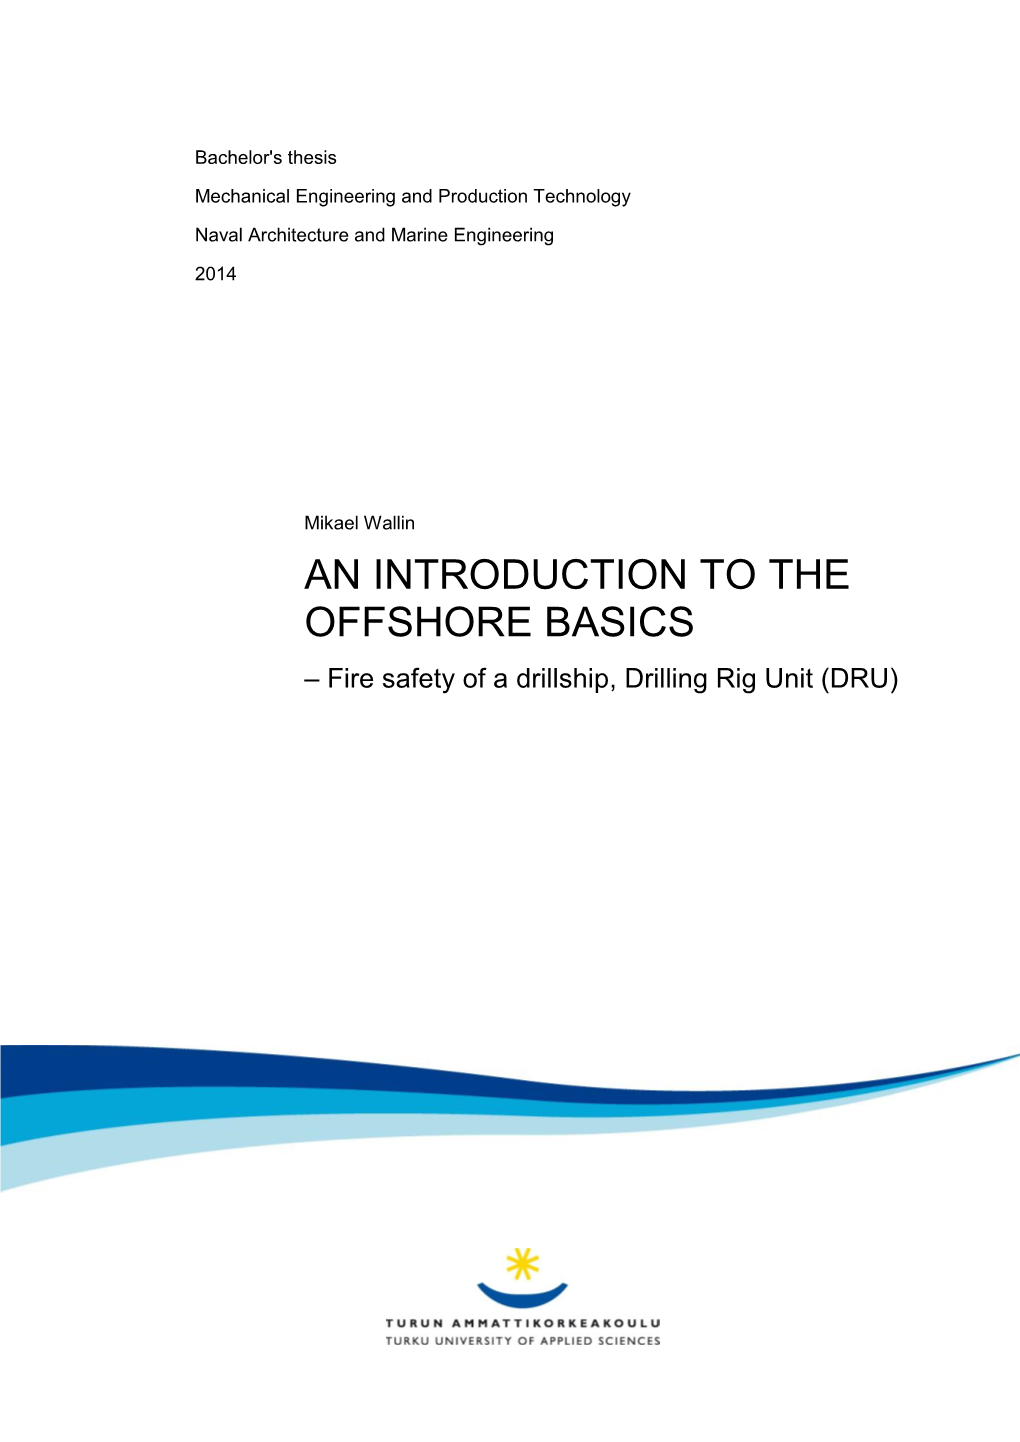 AN INTRODUCTION to the OFFSHORE BASICS – Fire Safety of a Drillship, Drilling Rig Unit (DRU)